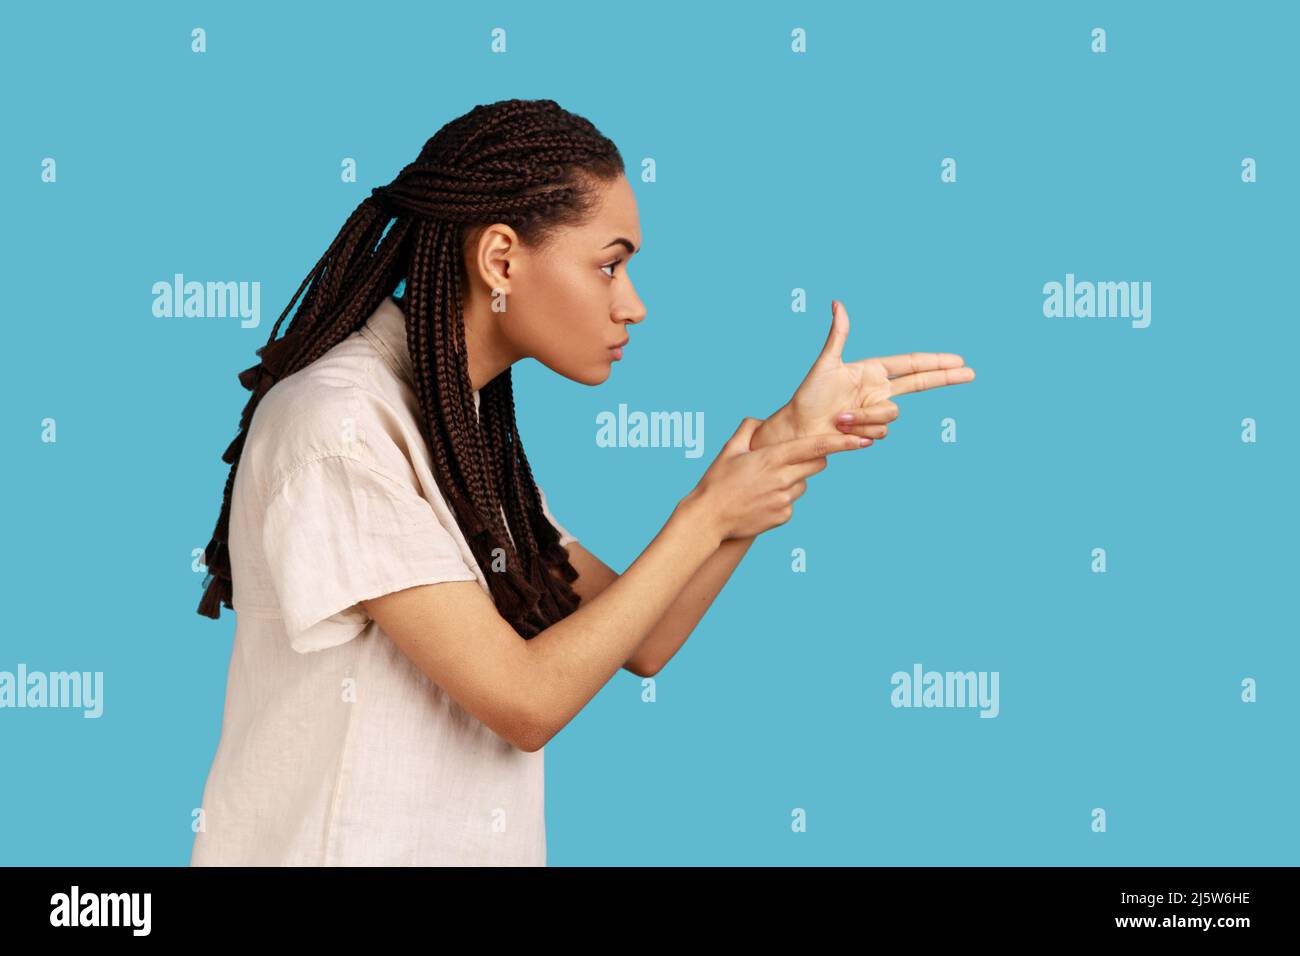 Side view of woman with black dreadlocks pointing finger gun, aiming and threatening to shoot with pistol hand gesture, wearing white shirt. Indoor studio shot isolated on blue background. Stock Photo